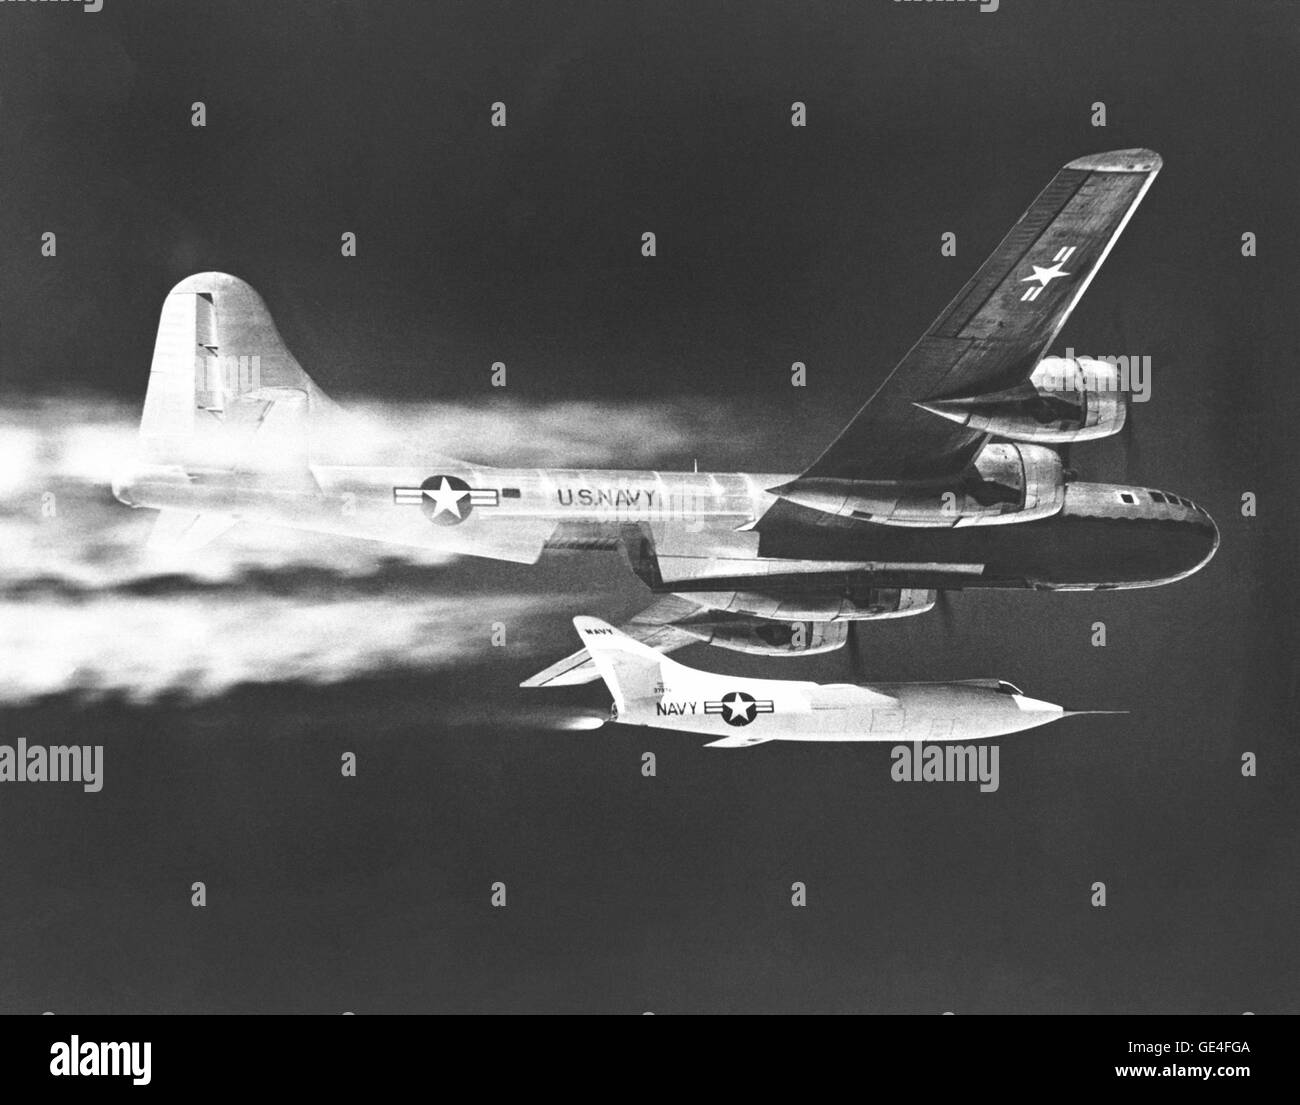 Description: (November 30, 1956) The D-558-2 #2 is launched from the P2B-1 in this 1956 NACA High-Speed Flight Station photograph. The D-558 Phase Two aircraft was quite different from its Phase One predecessor, the Skystreak. German wartime aeronautical research records, reviewed in 1945 by Douglas Aircraft Company personnel, pointed to many advantages gained from incorporating sweptback wing design into future research aircraft. These findings along with wind tunnel studies performed by the National Advisory Committee for Aeronautics (NACA) at Langley Memorial Aeronautical Laboratory, result Stock Photo